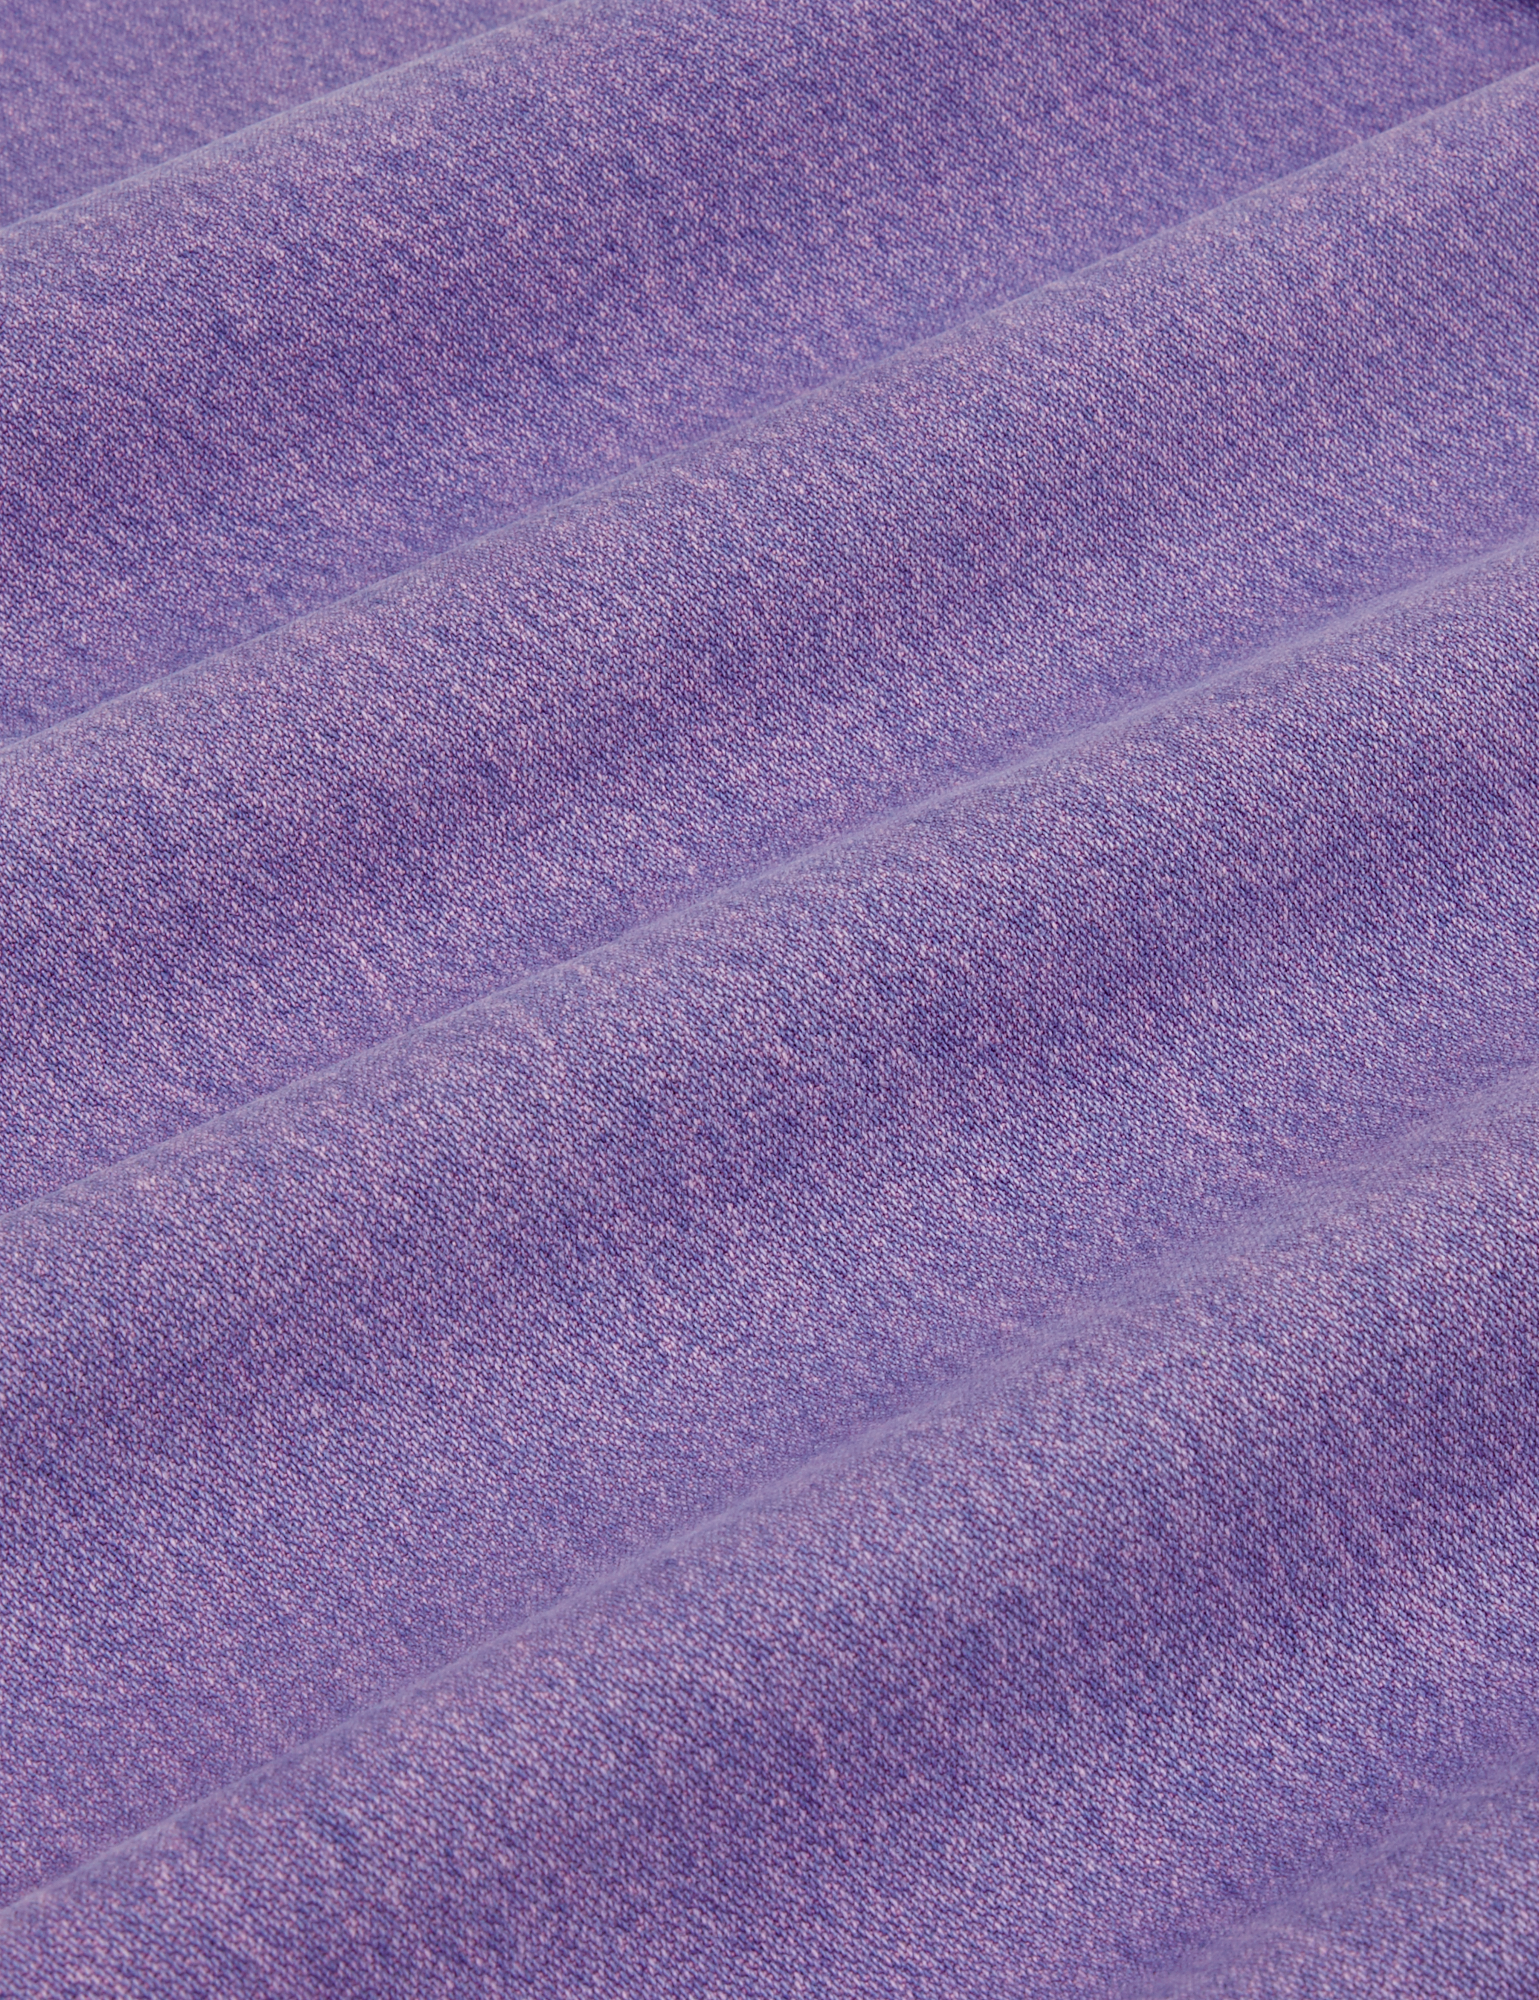 Overdyed Wide Leg Trousers in Faded Grape fabric detail close up